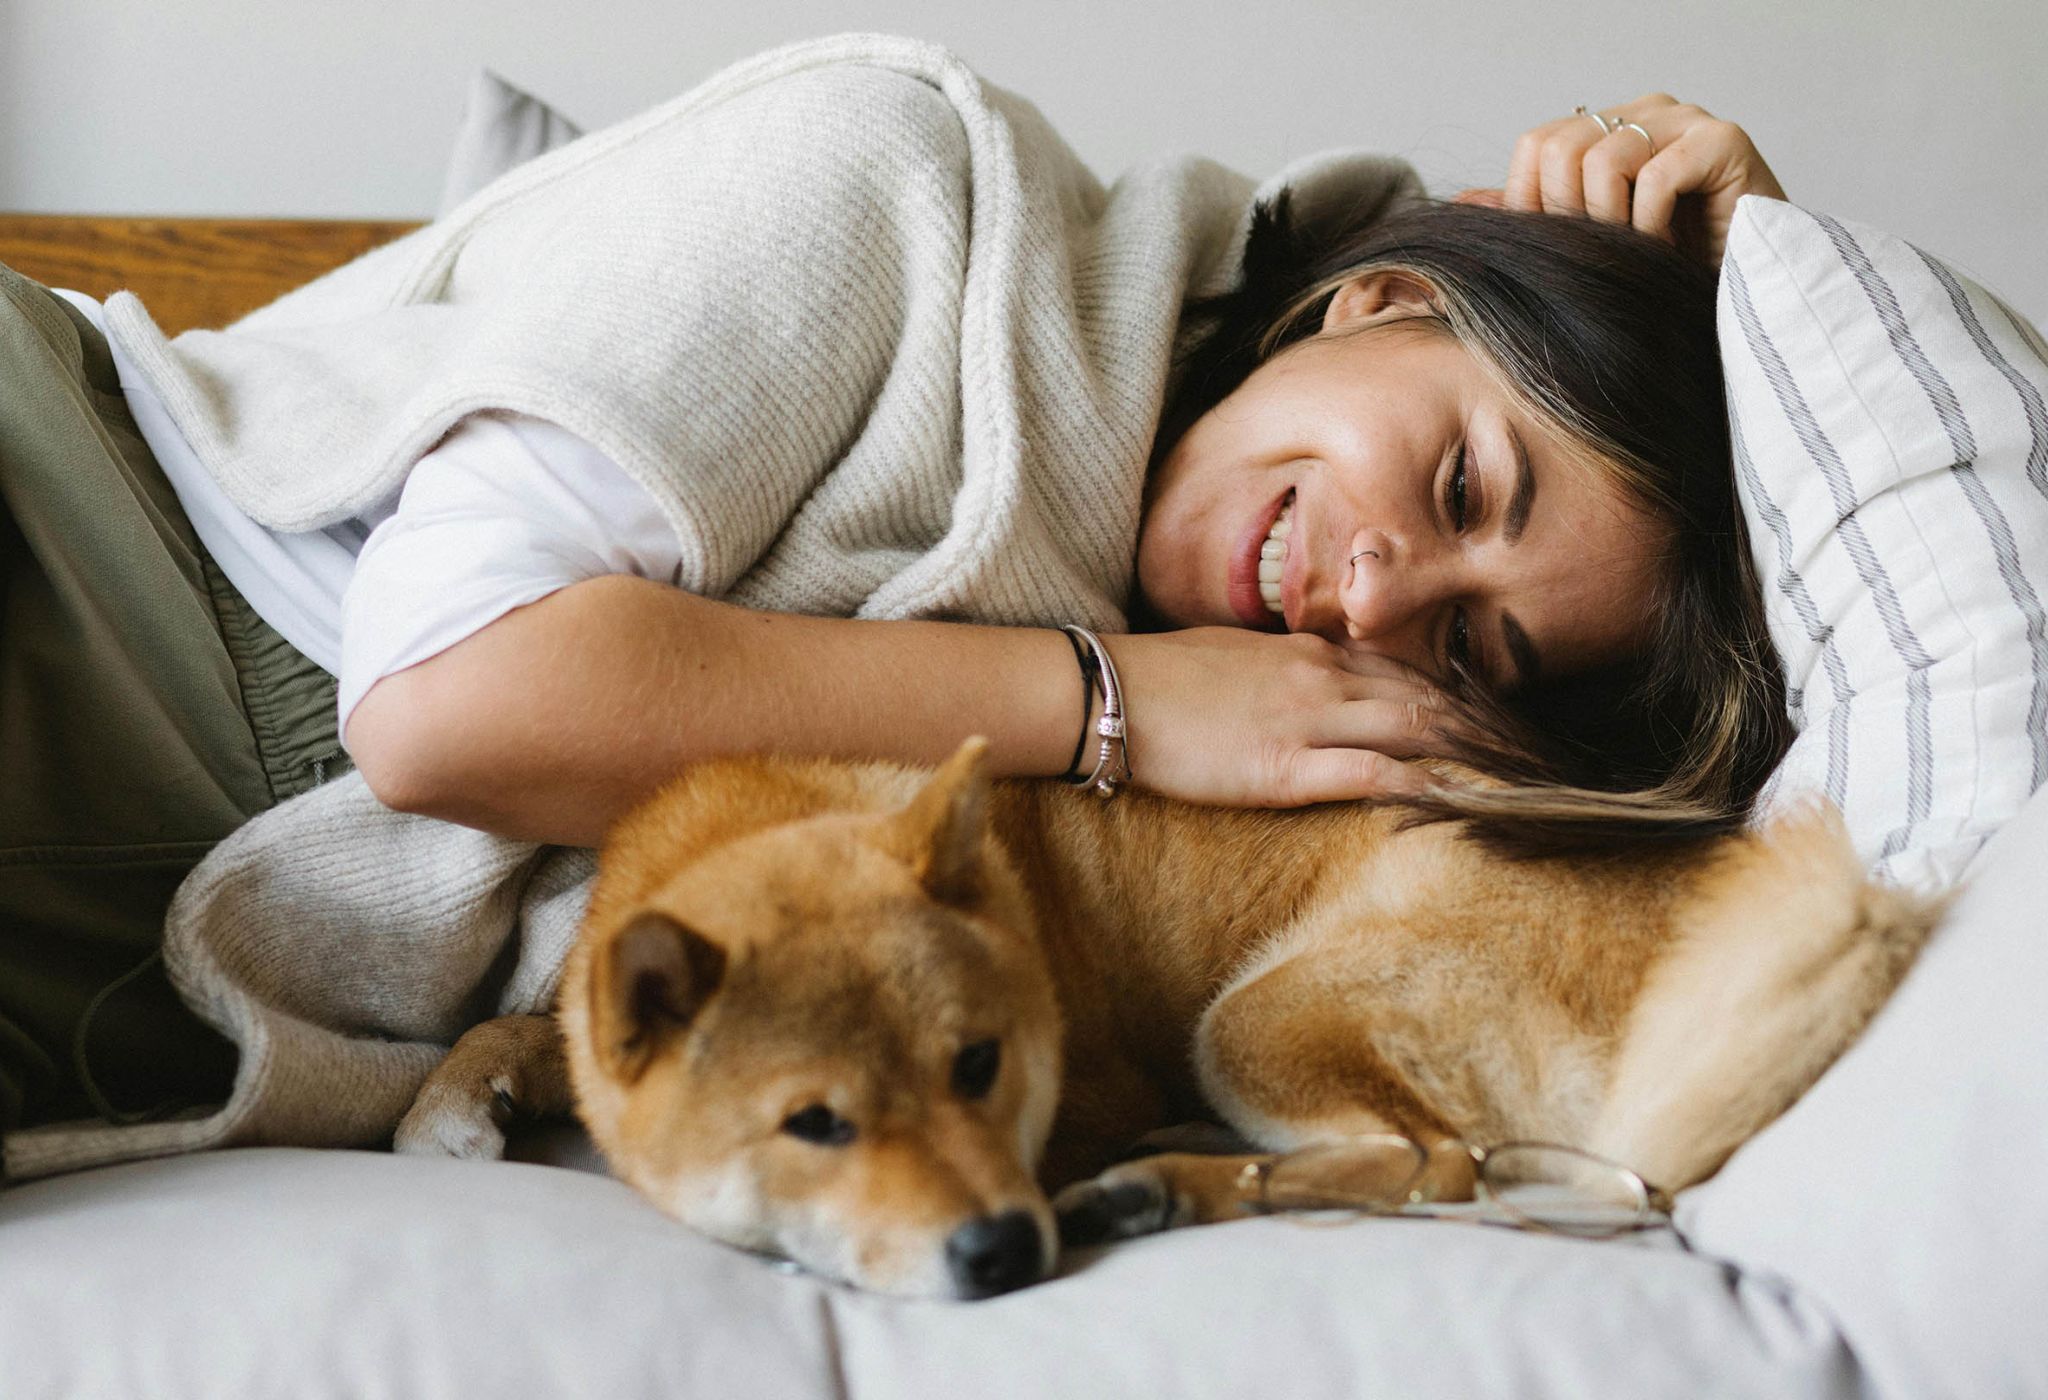 A woman cuddles with a small dog on a light colored couch